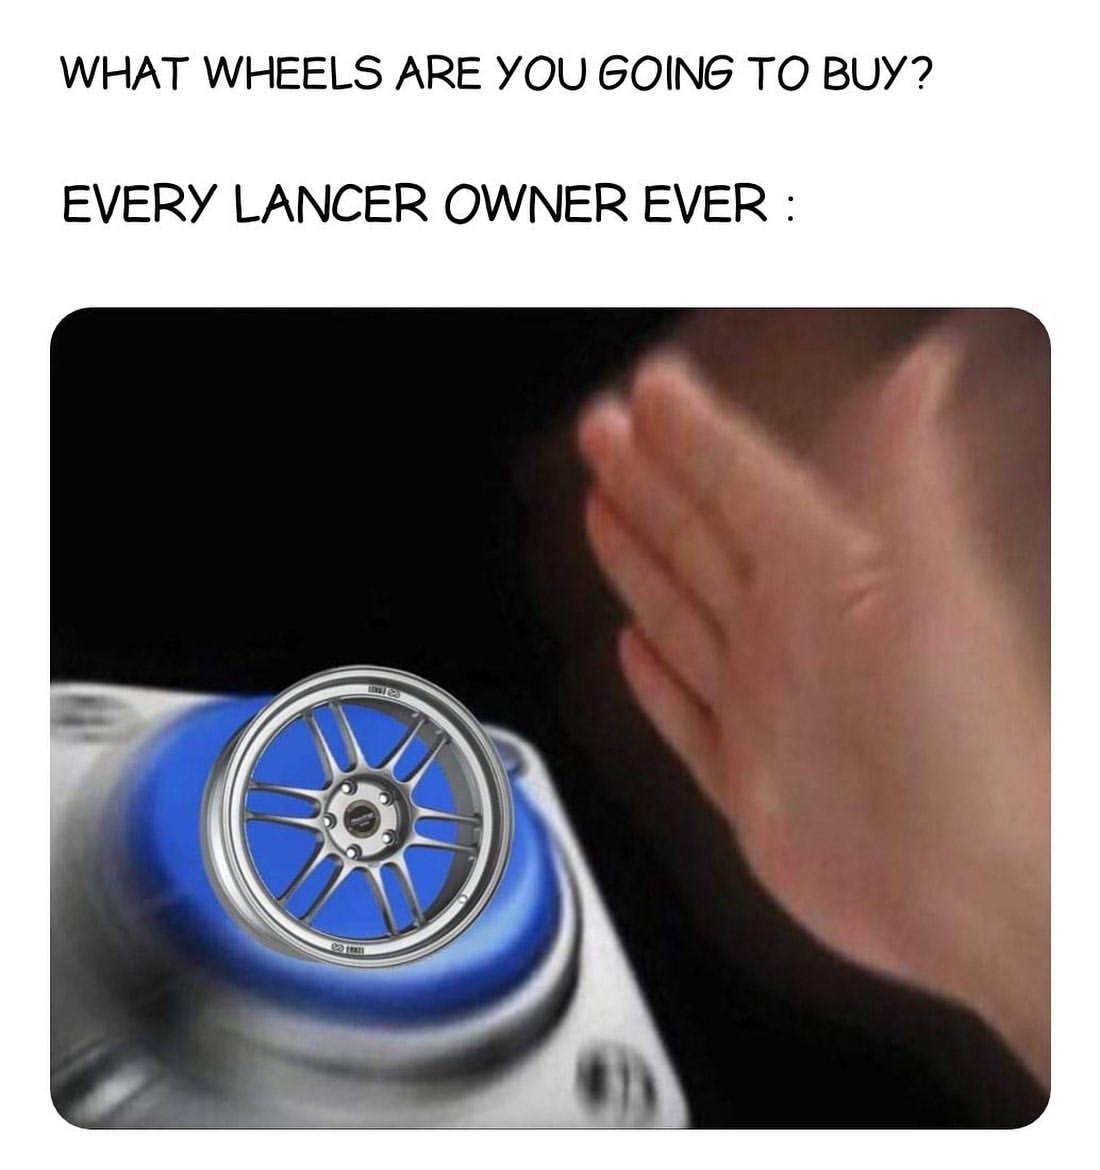 What wheels are you going to buy?  Every lancer owner ever: